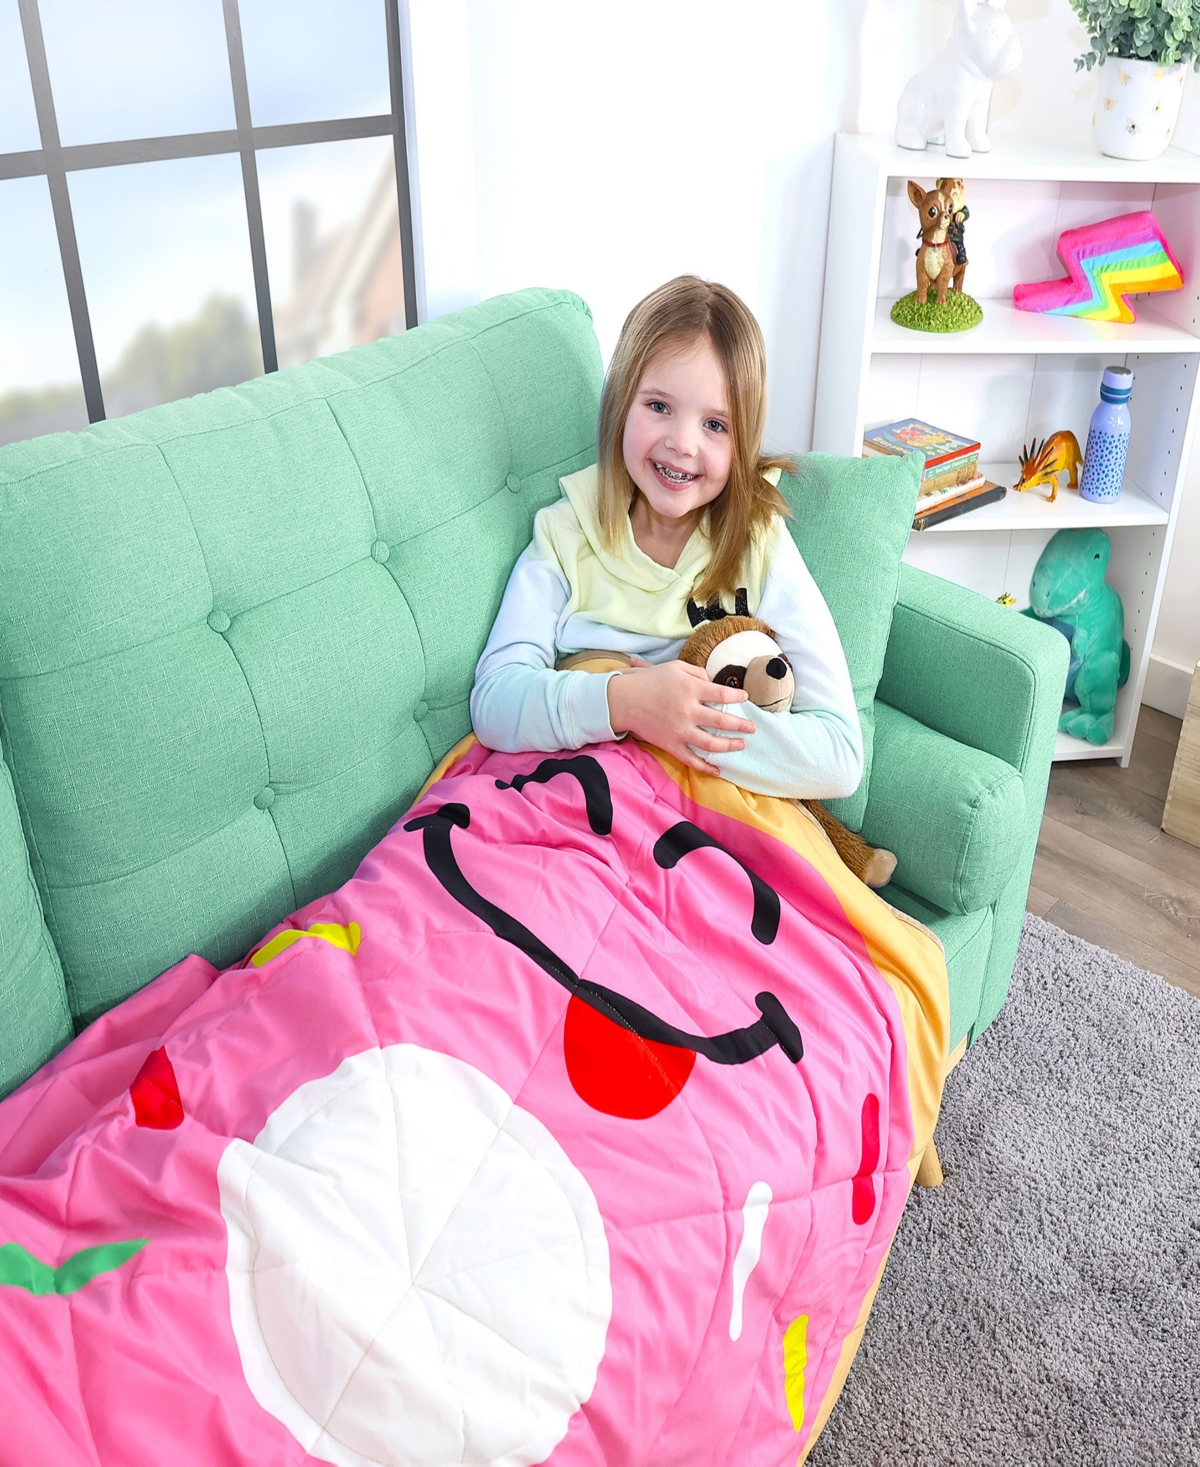 Shop Good Banana Kid's Donut Weighted Blanket In Multi